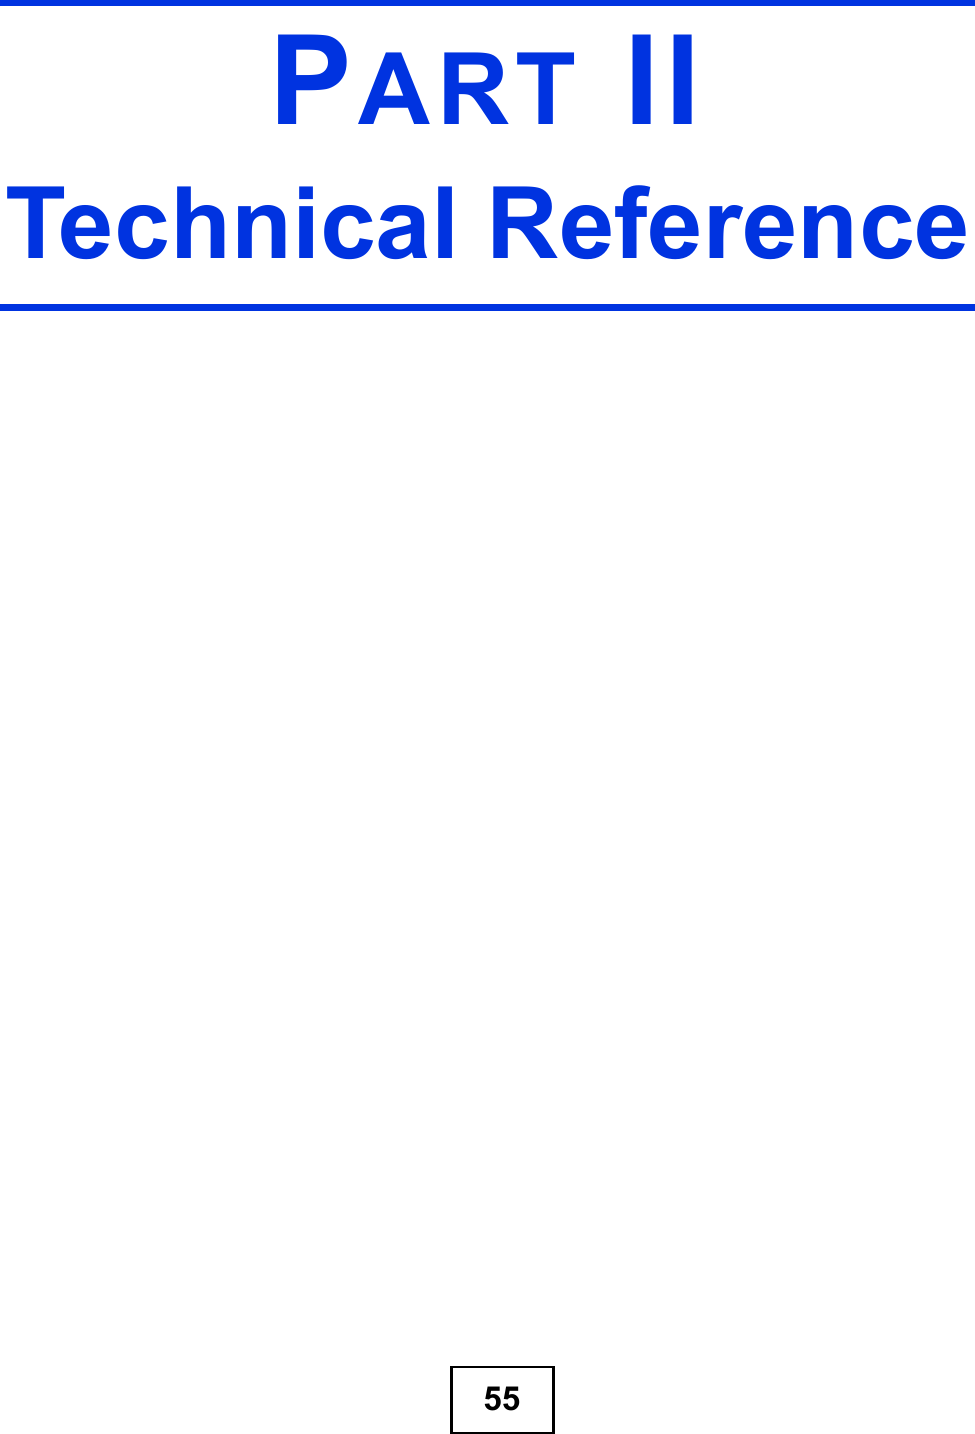 55PART IITechnical Reference